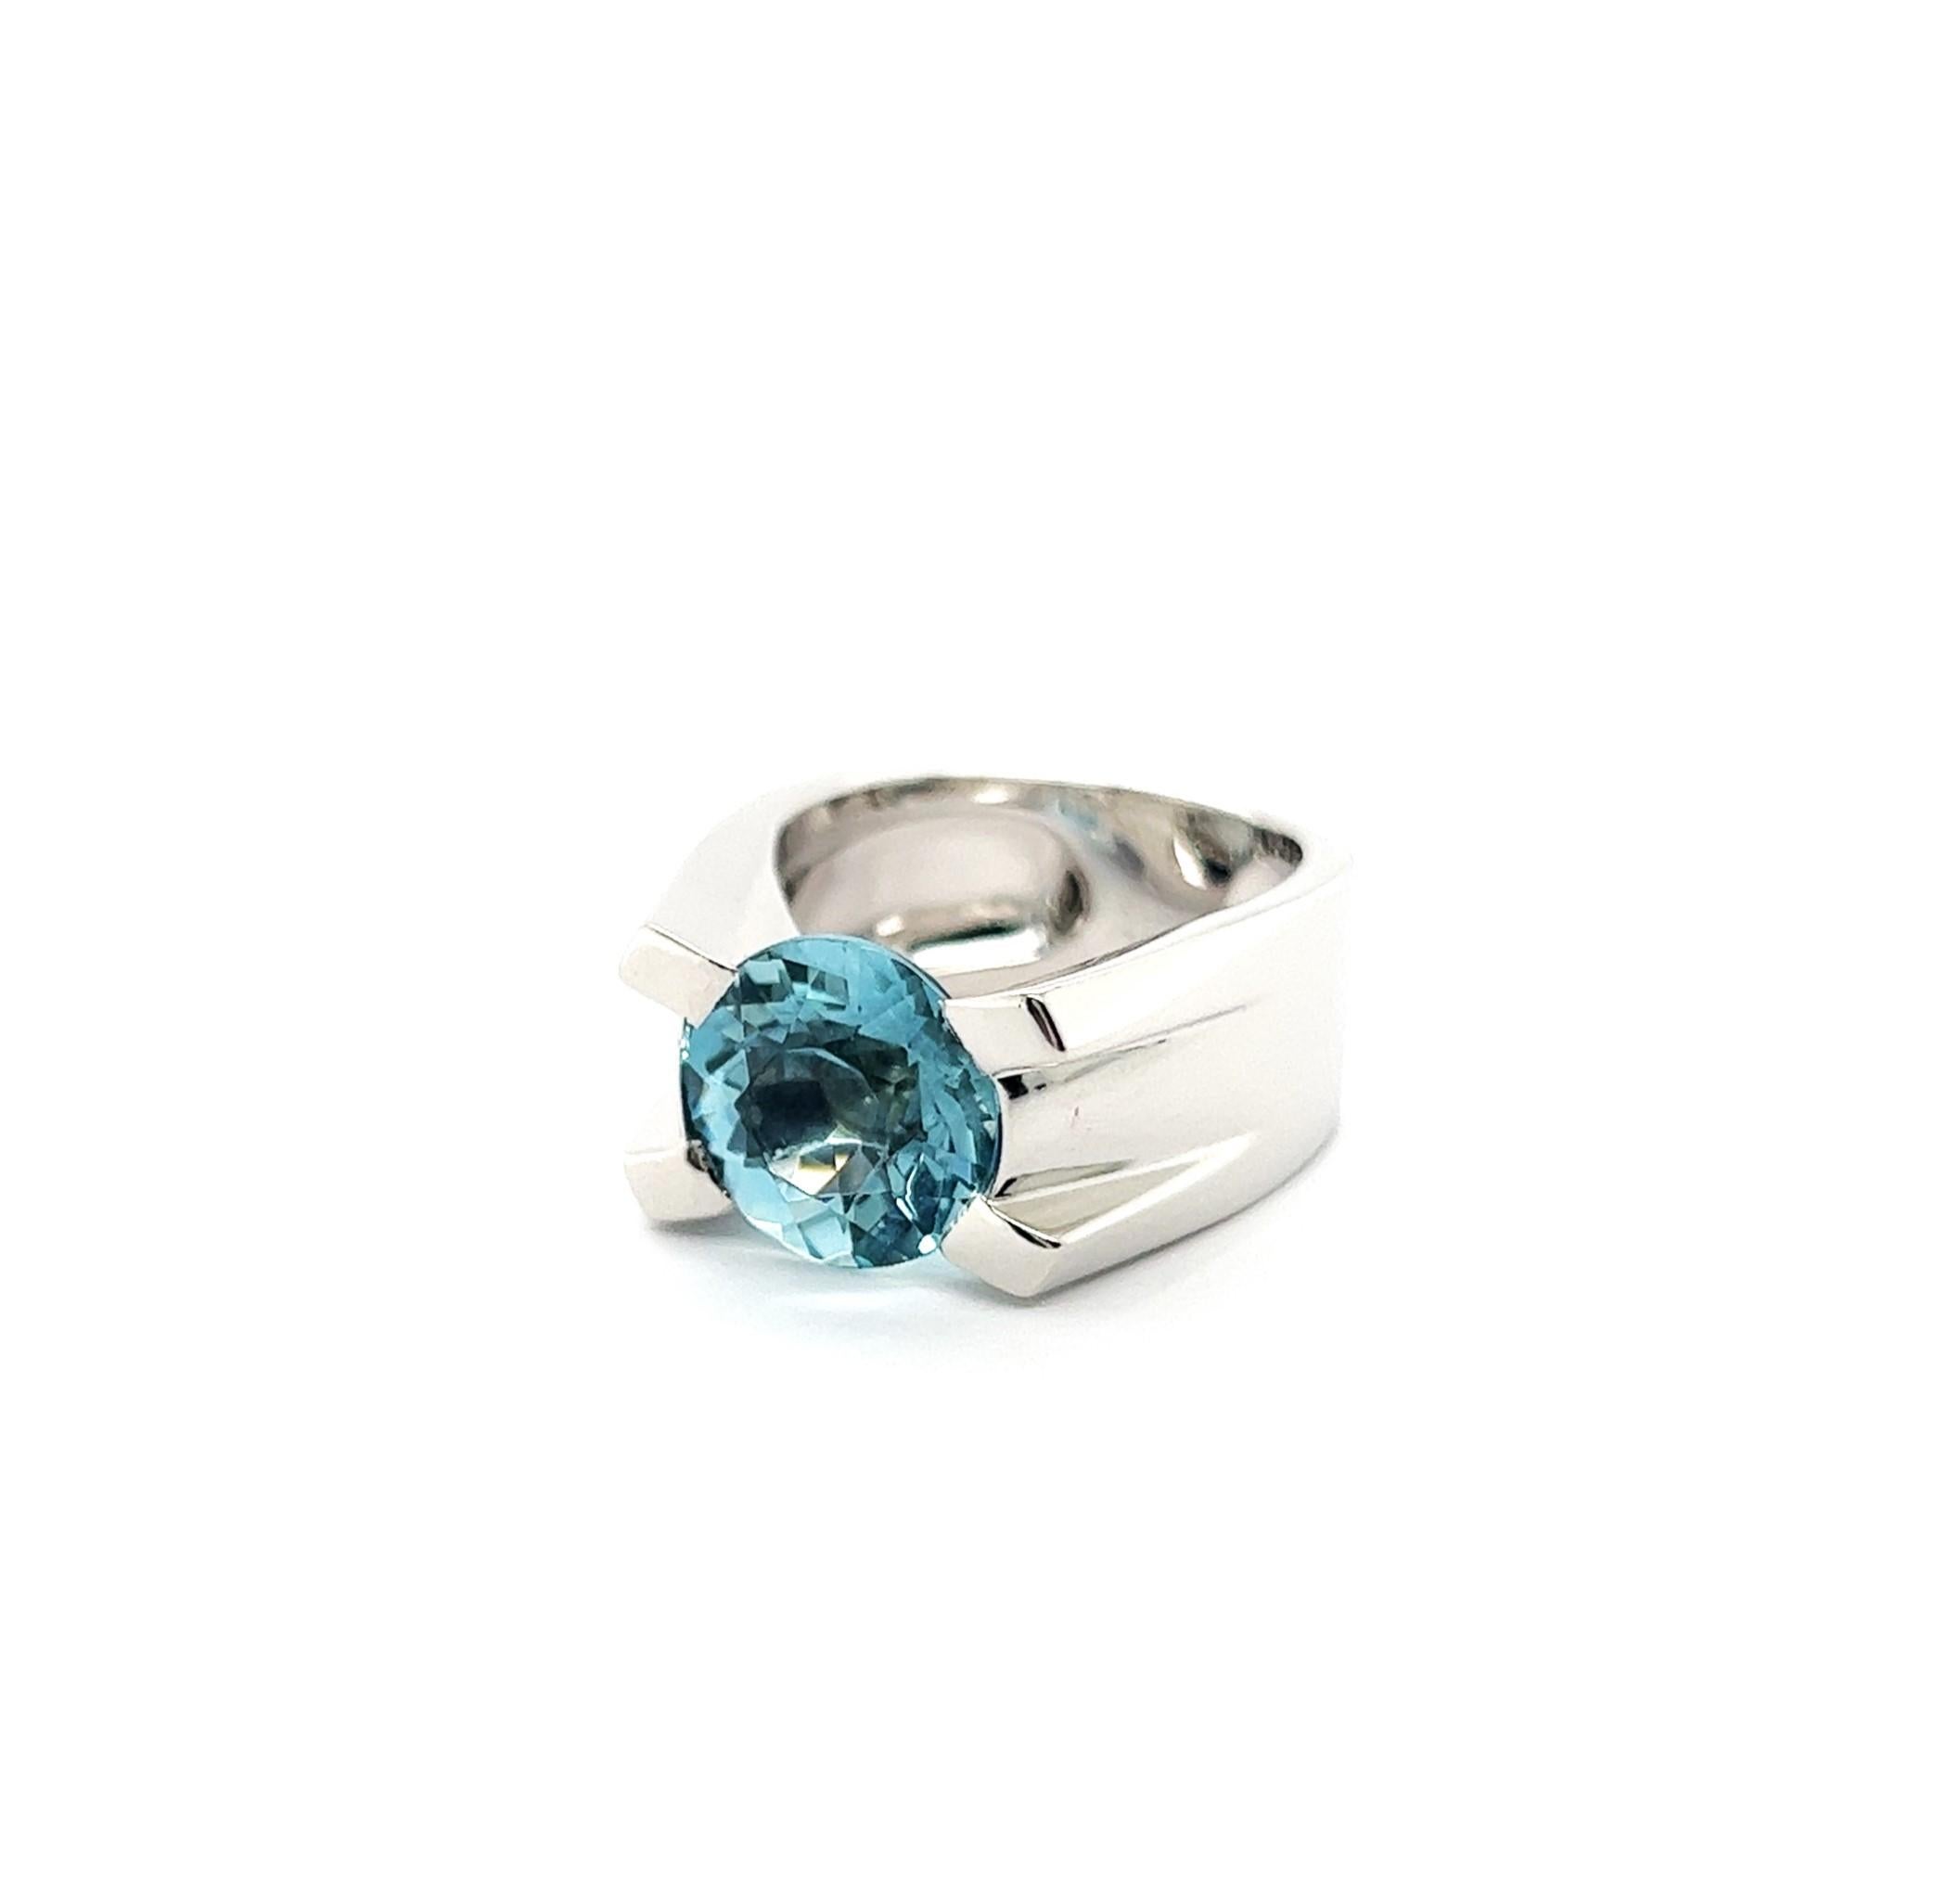 This Cartier ring is a masterpiece, featuring a 3.70 carat aquamarine at its heart. According to legend, aquamarine originated from the sea, and its calming blue hues were believed to soothe the waves and ensure a safe journey across the mighty